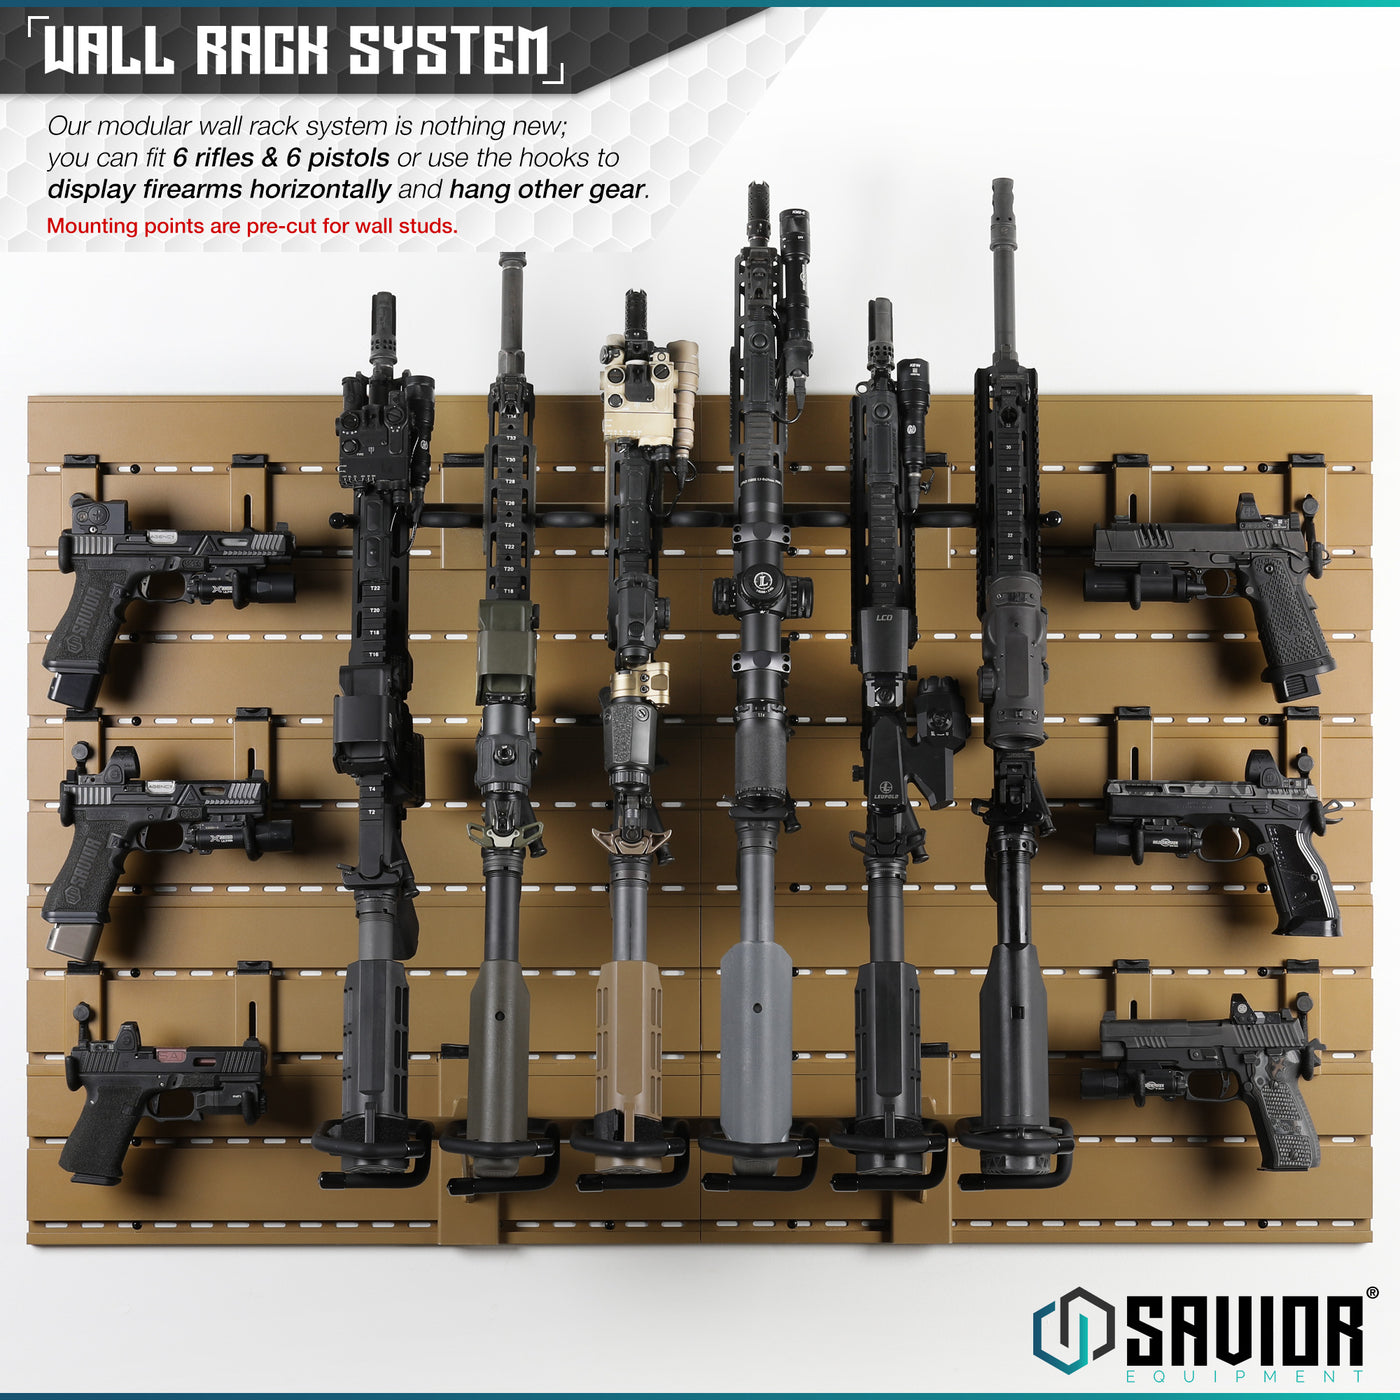 Wall Rack System - Our modular wall rack system is nothing new; you can fit up to 3 or 6 rifles & 3 or 6 pistols or use the hooks to display firearms horizontally and hang other gear. Mounting points are pre-cut for wall studs.